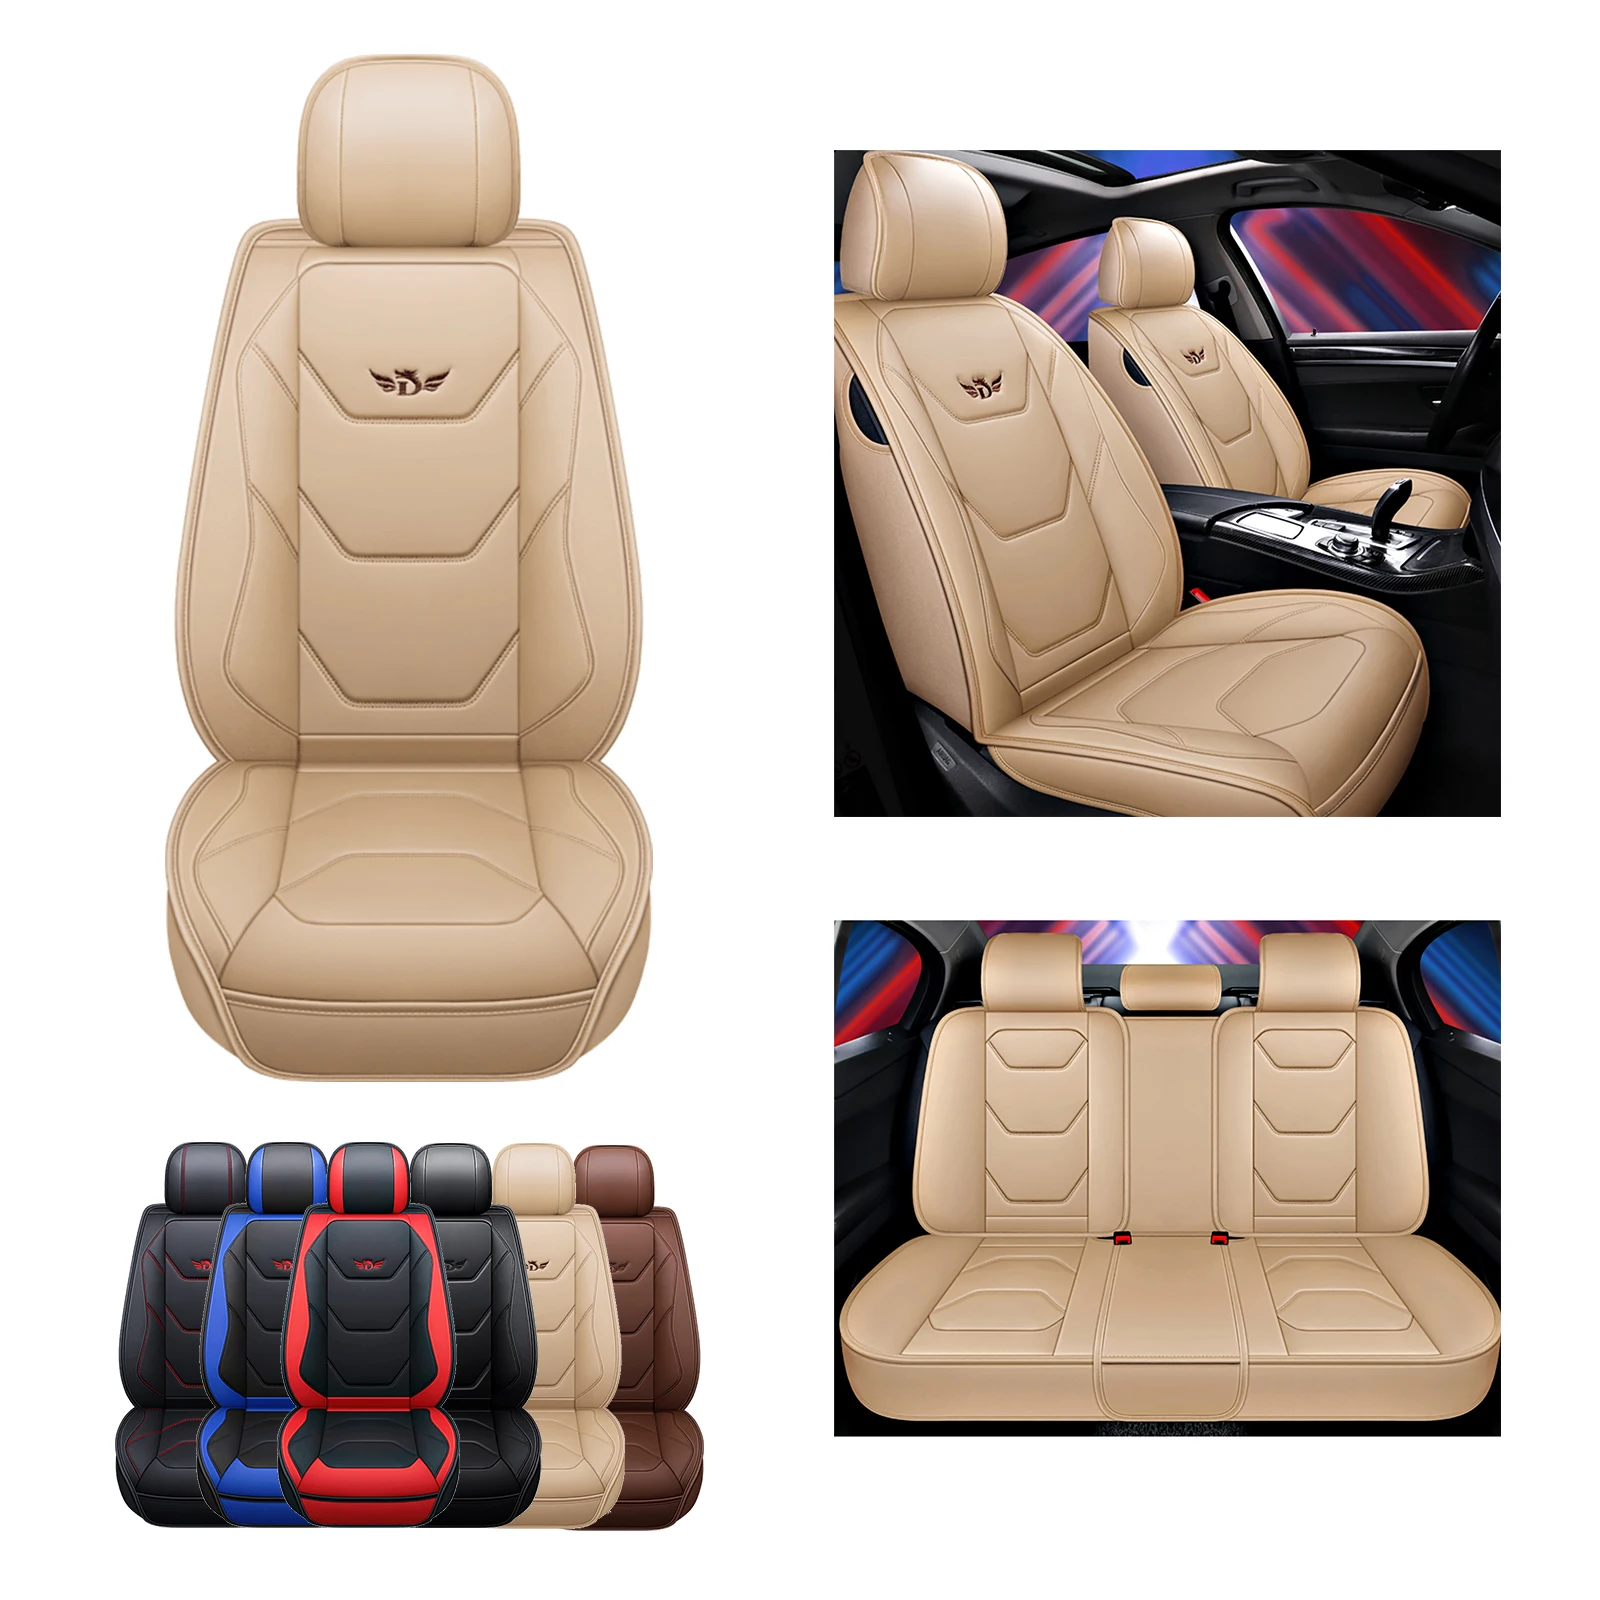 CAR-GRAND Universal Luxury Wood Grain Leather Universal Fit Full Set Car  Seat Cover, Airbag Compatible,Fit for Suvs,Sedans,Vans,Trucks (Black with